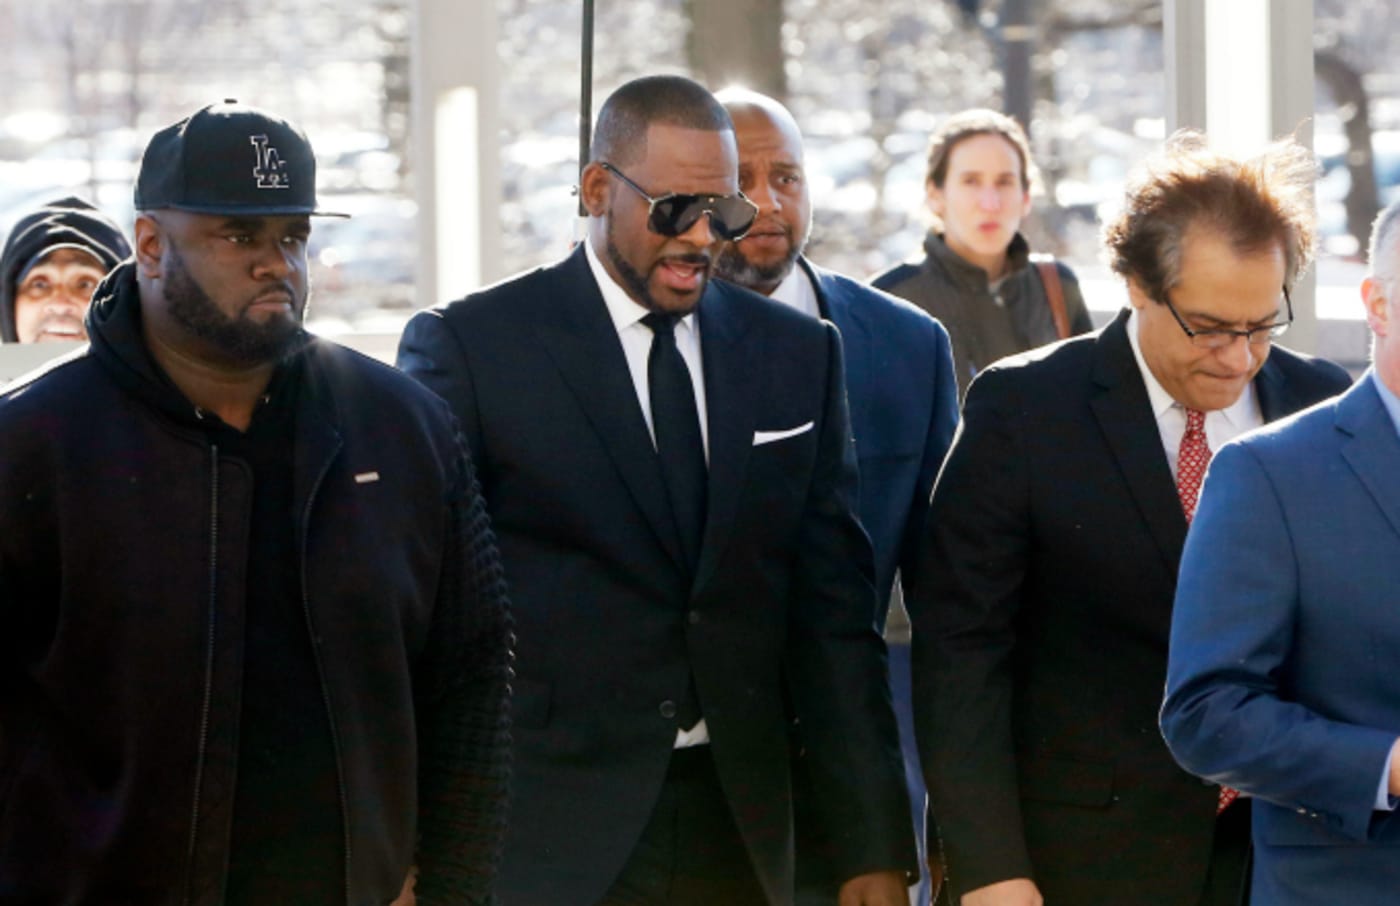 Singer R. Kelly (C) arrives for his court date